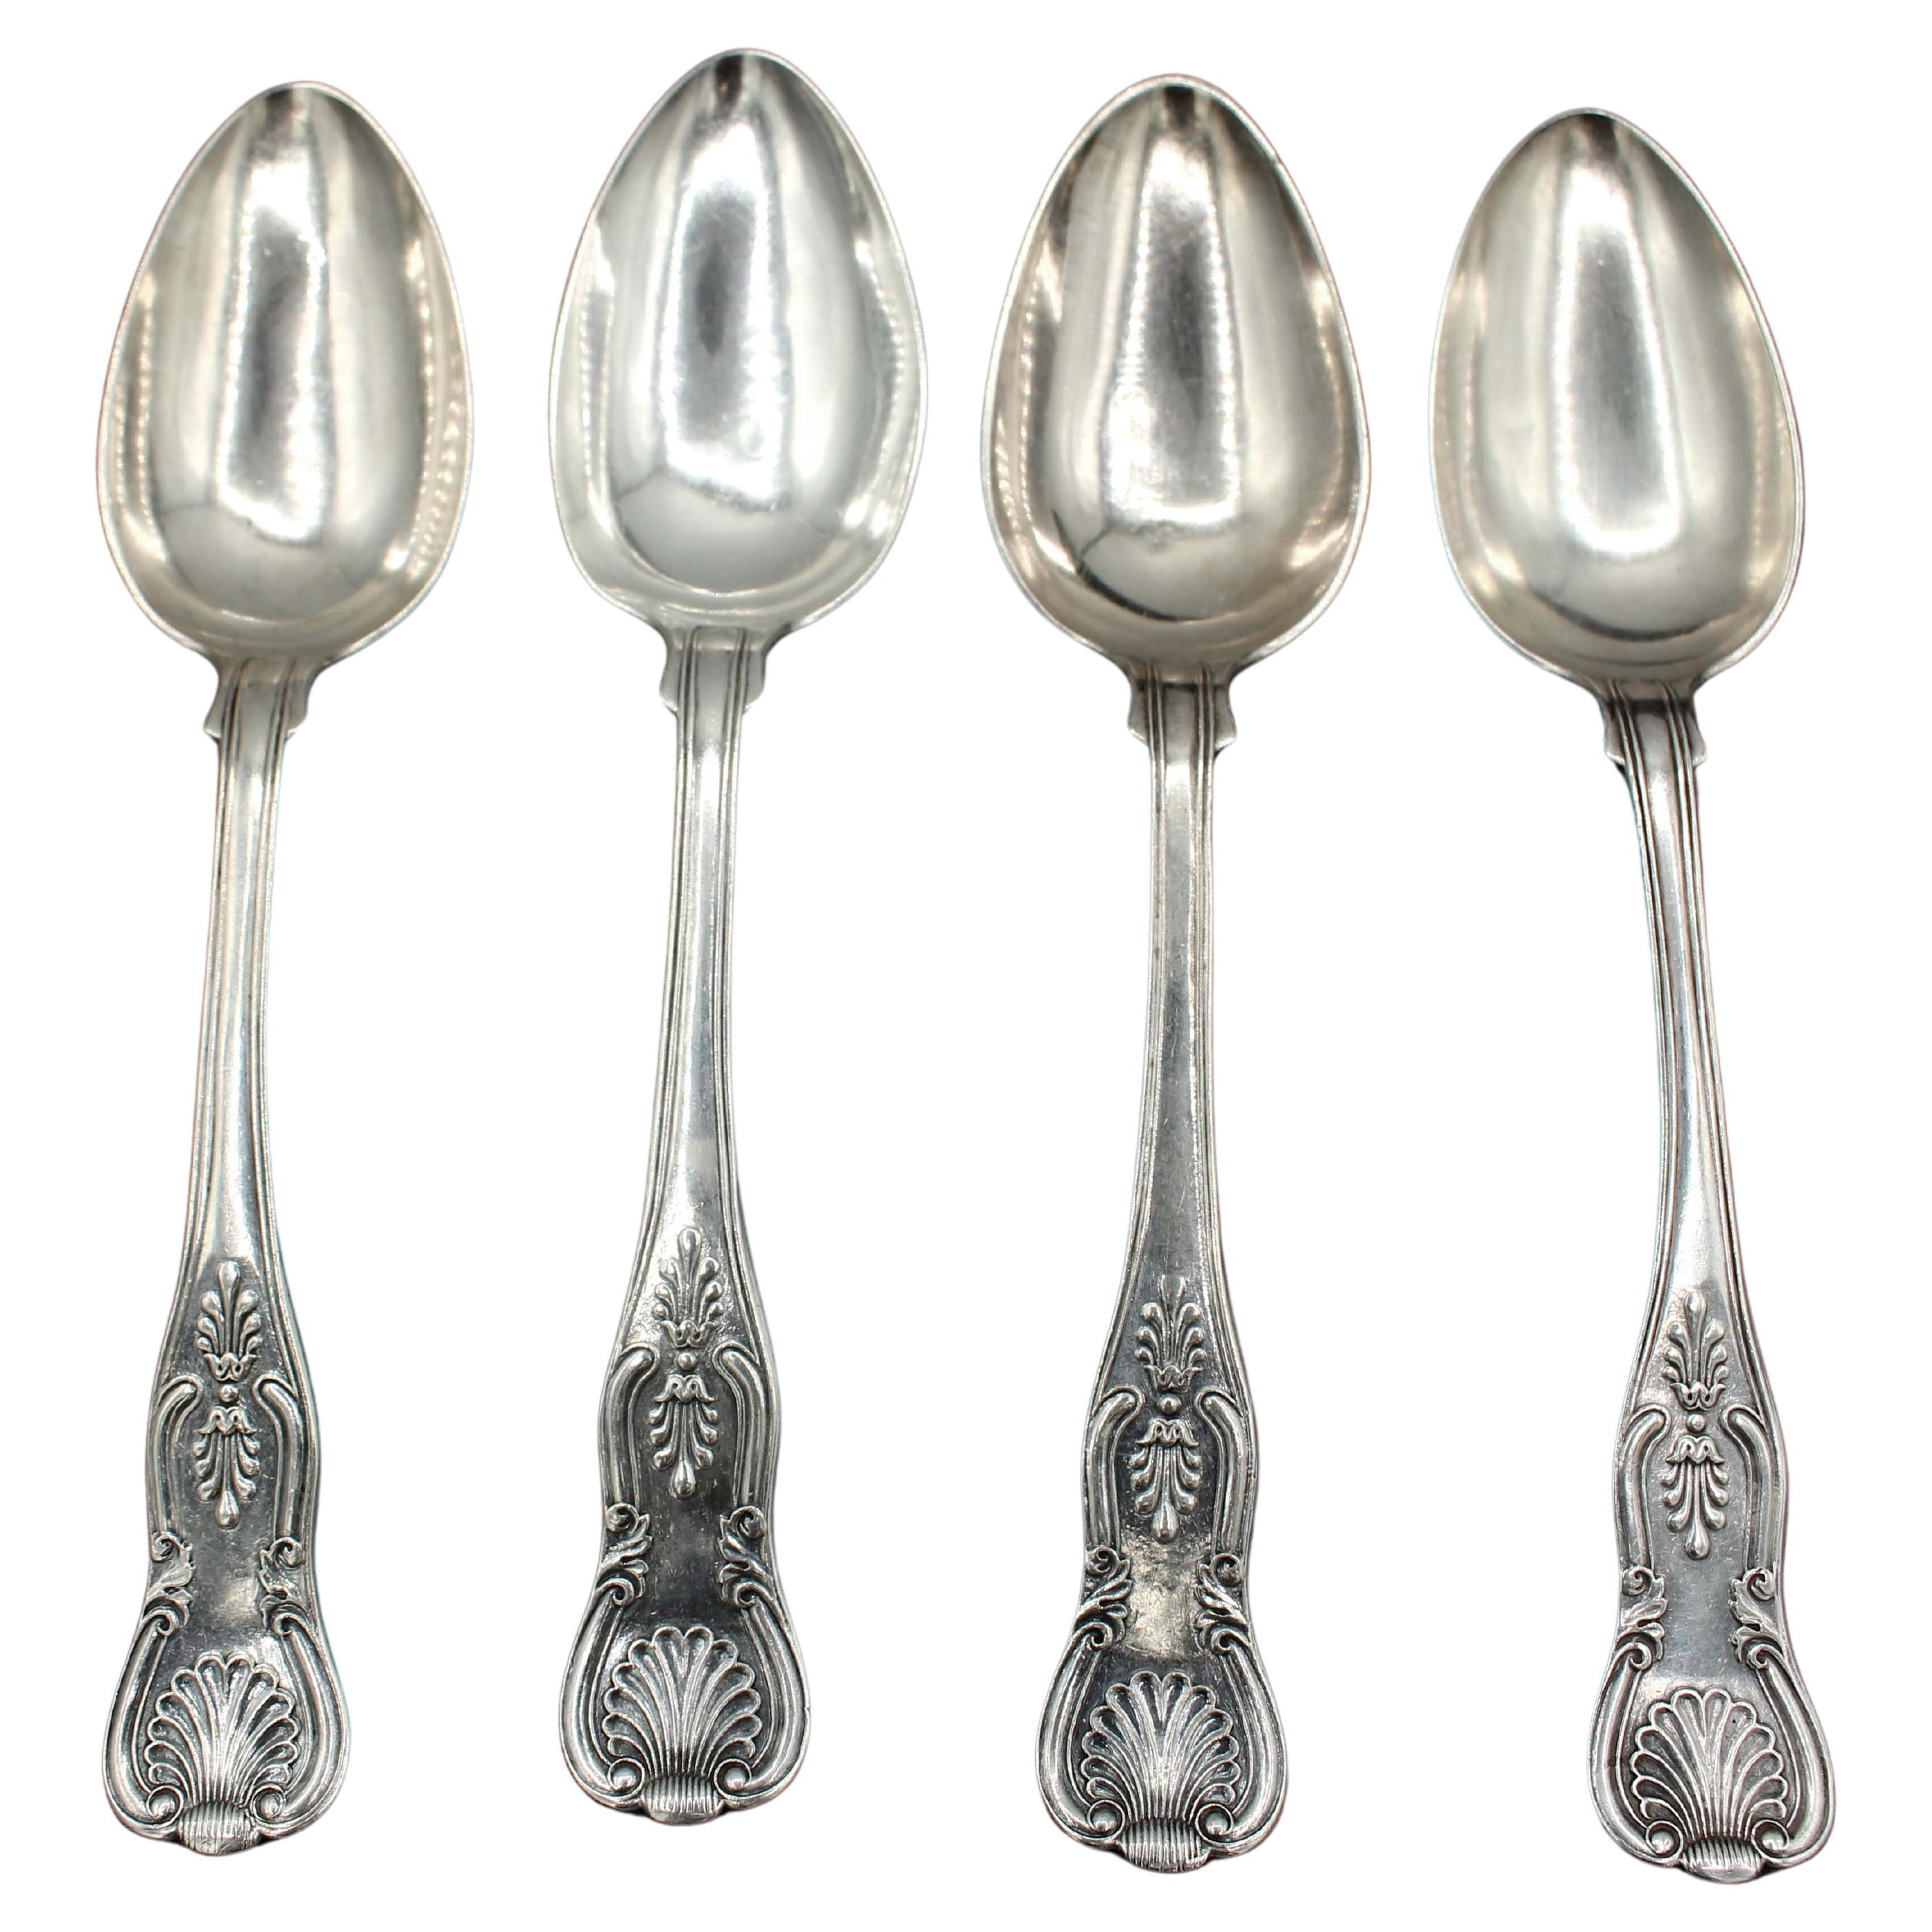 1860 Set of Four "Kings" Pattern Silver Spoons For Sale